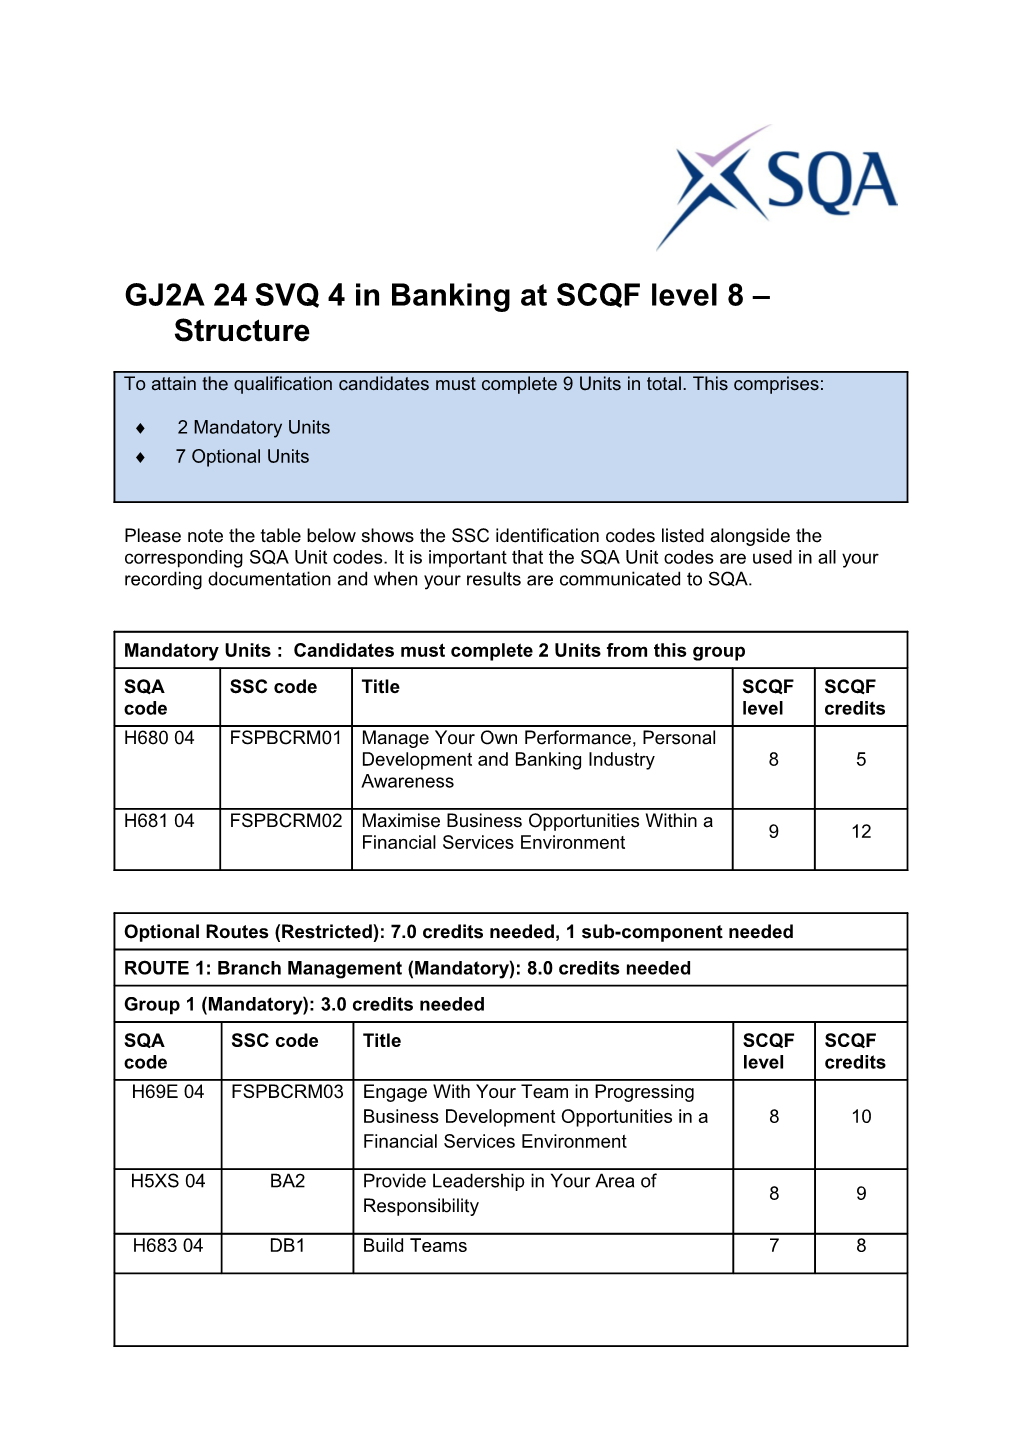 GJ2A 24SVQ 4 in Banking at SCQF Level8 Structure